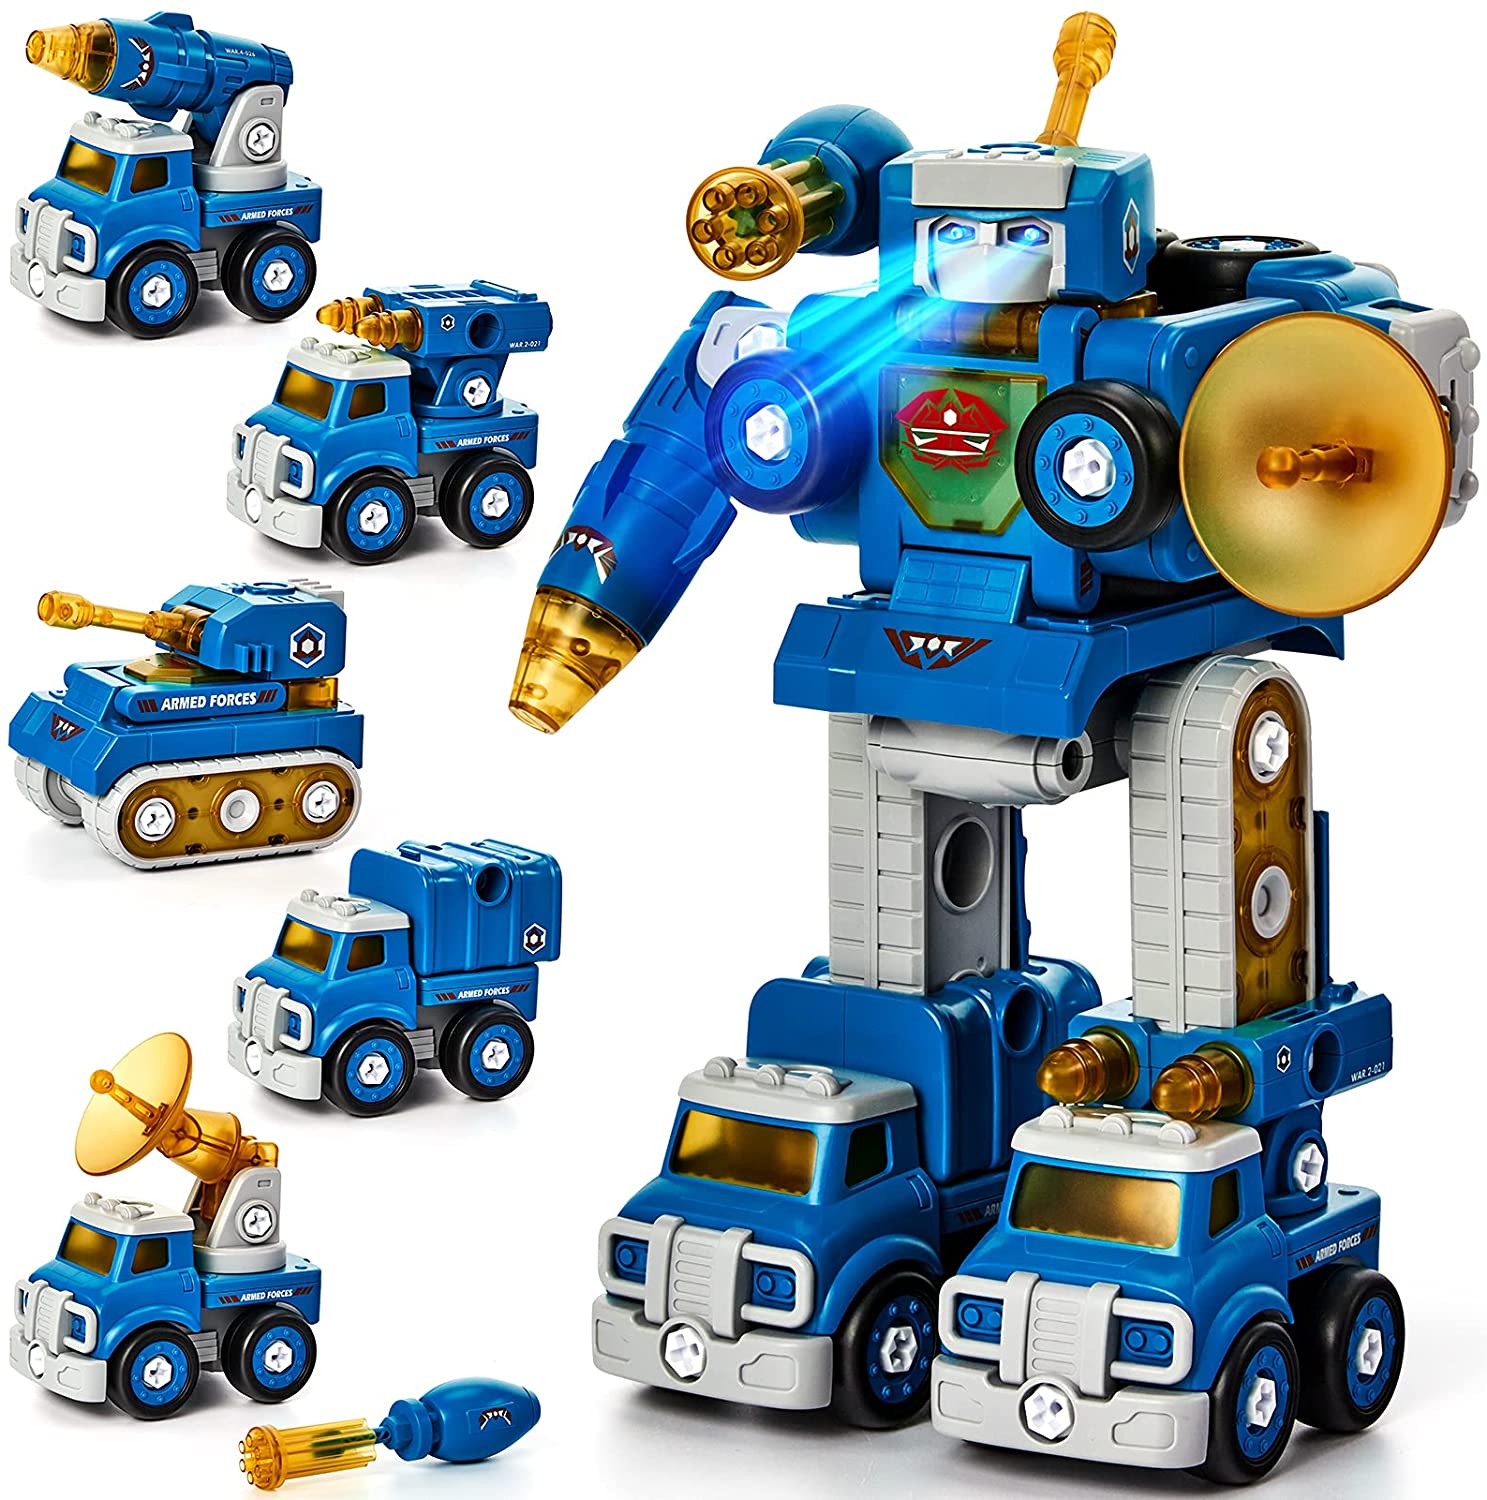 Review of Take Apart Robot Toys Vehicle Set 5 in 1 Construction Toys for 5 Year Old Boys